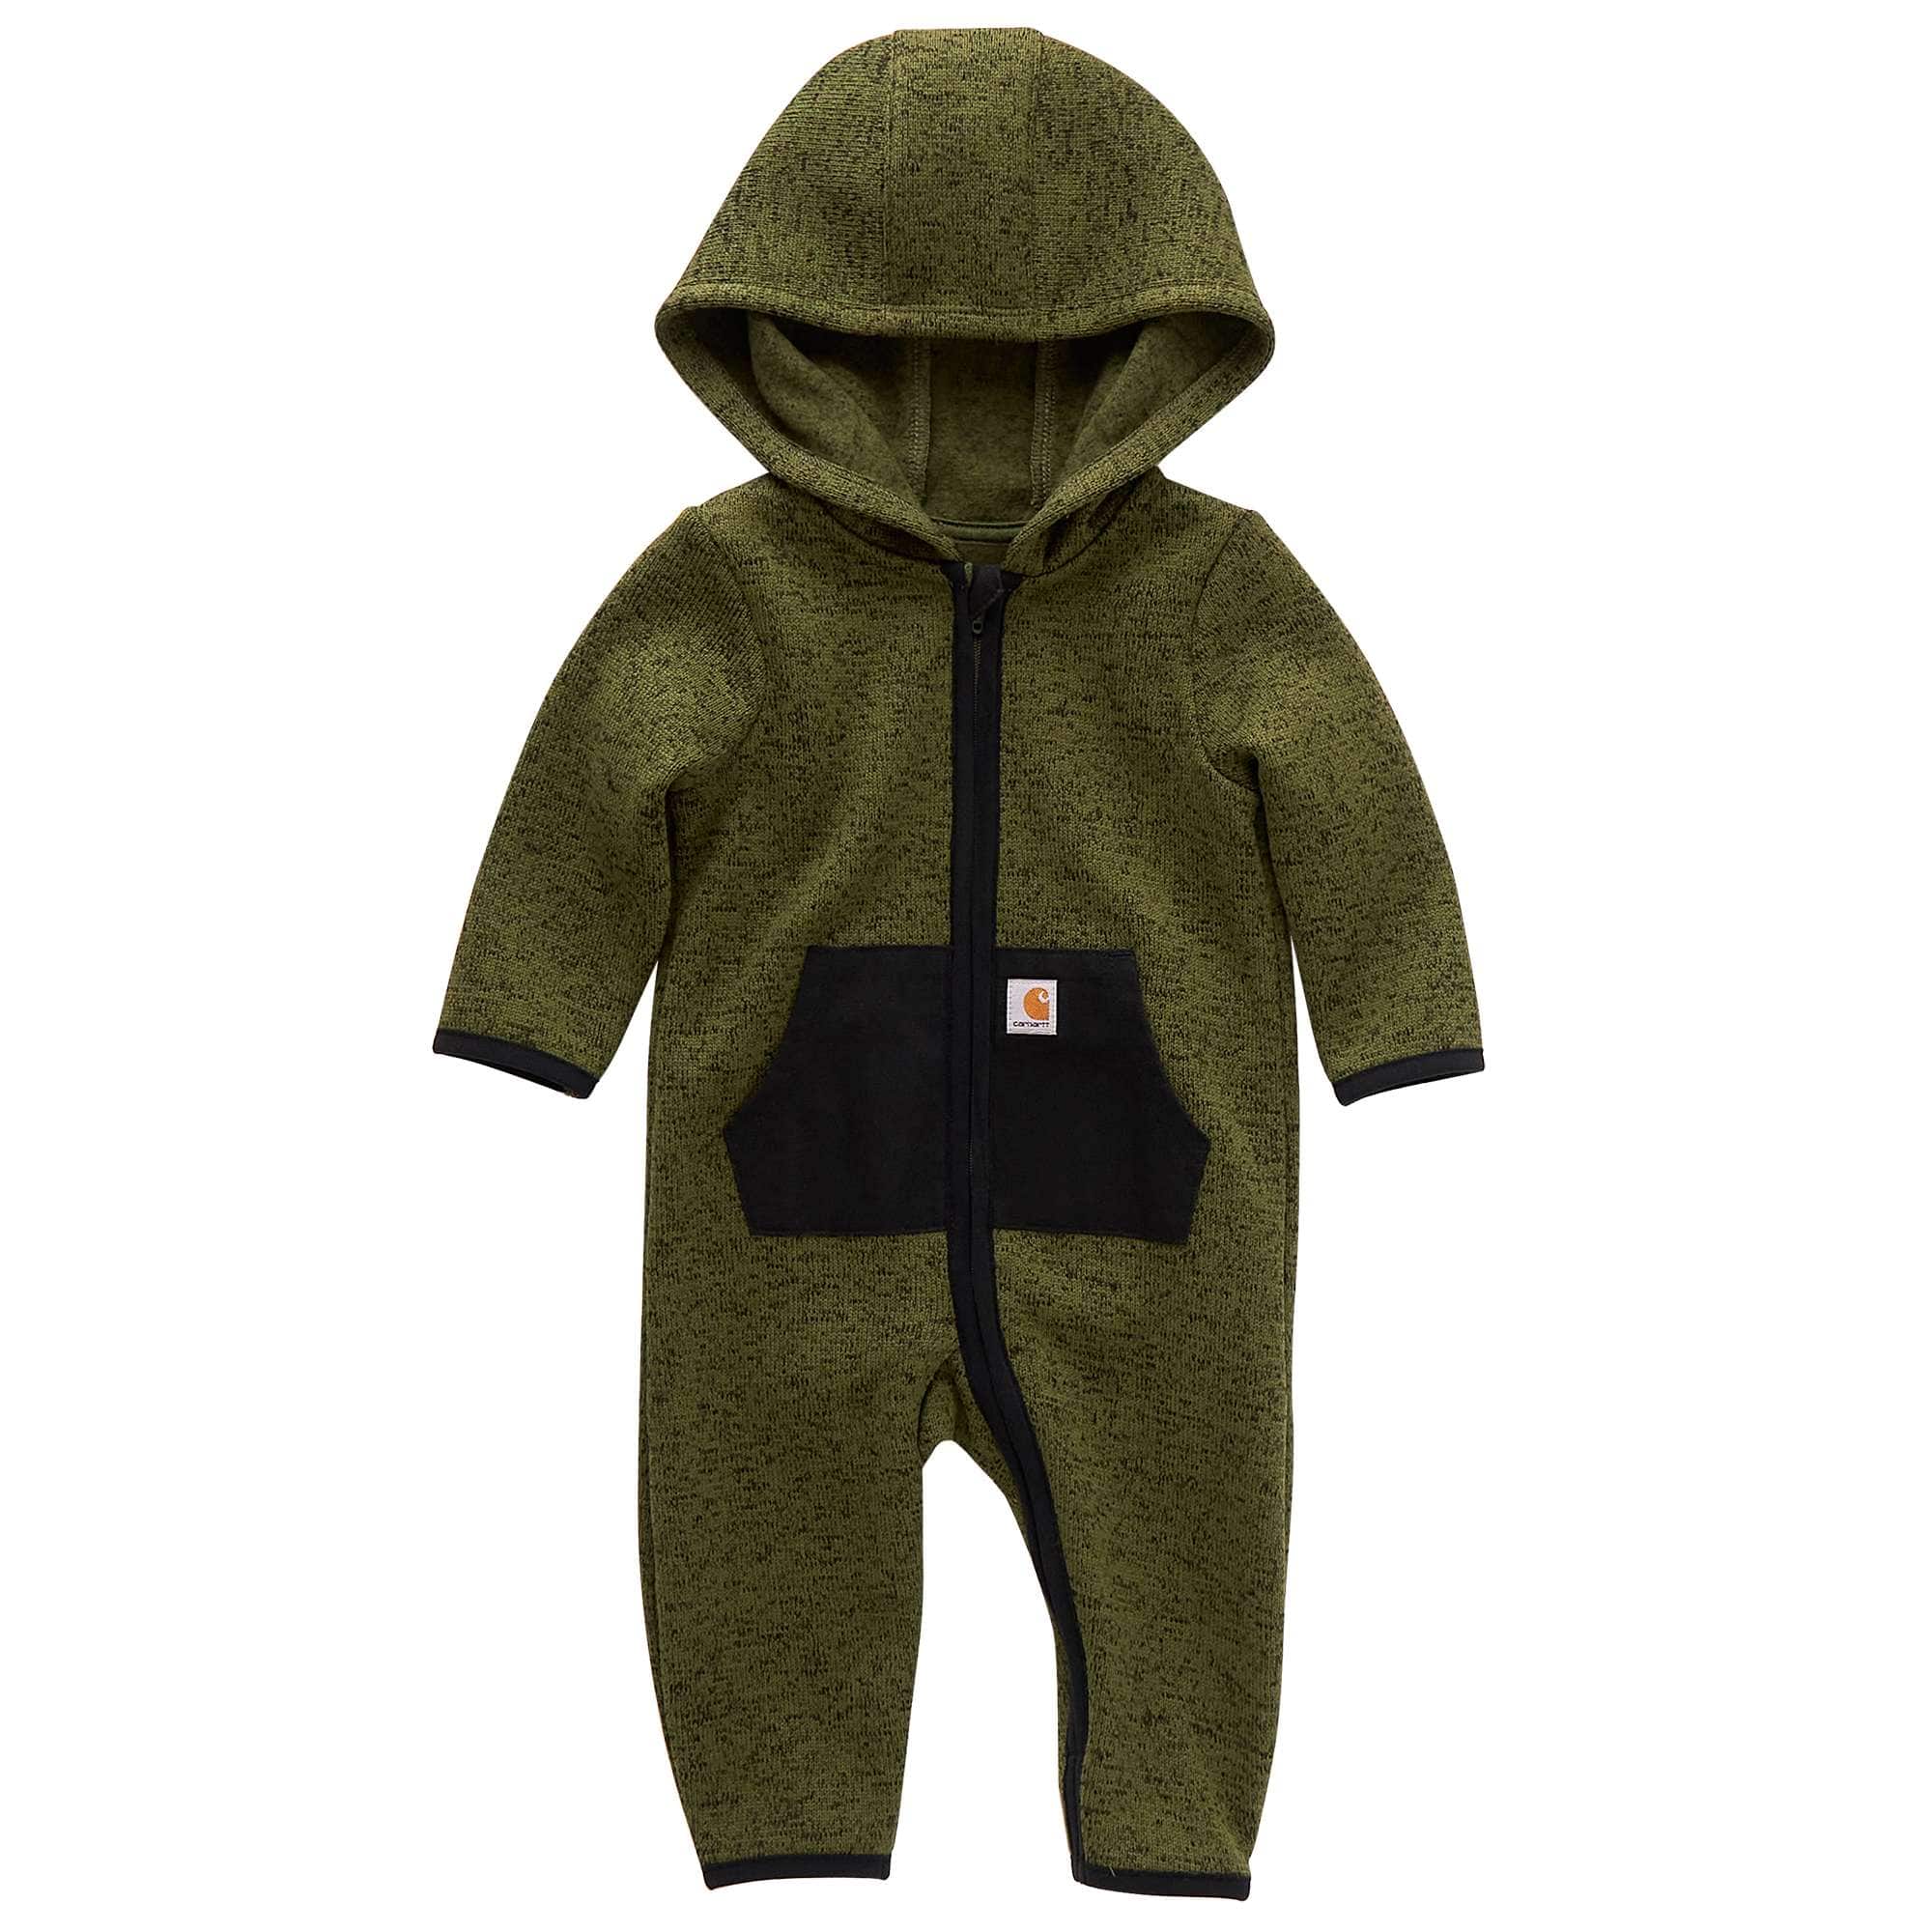 Kids' Long-Sleeve Zip-Front Coverall (Infant)